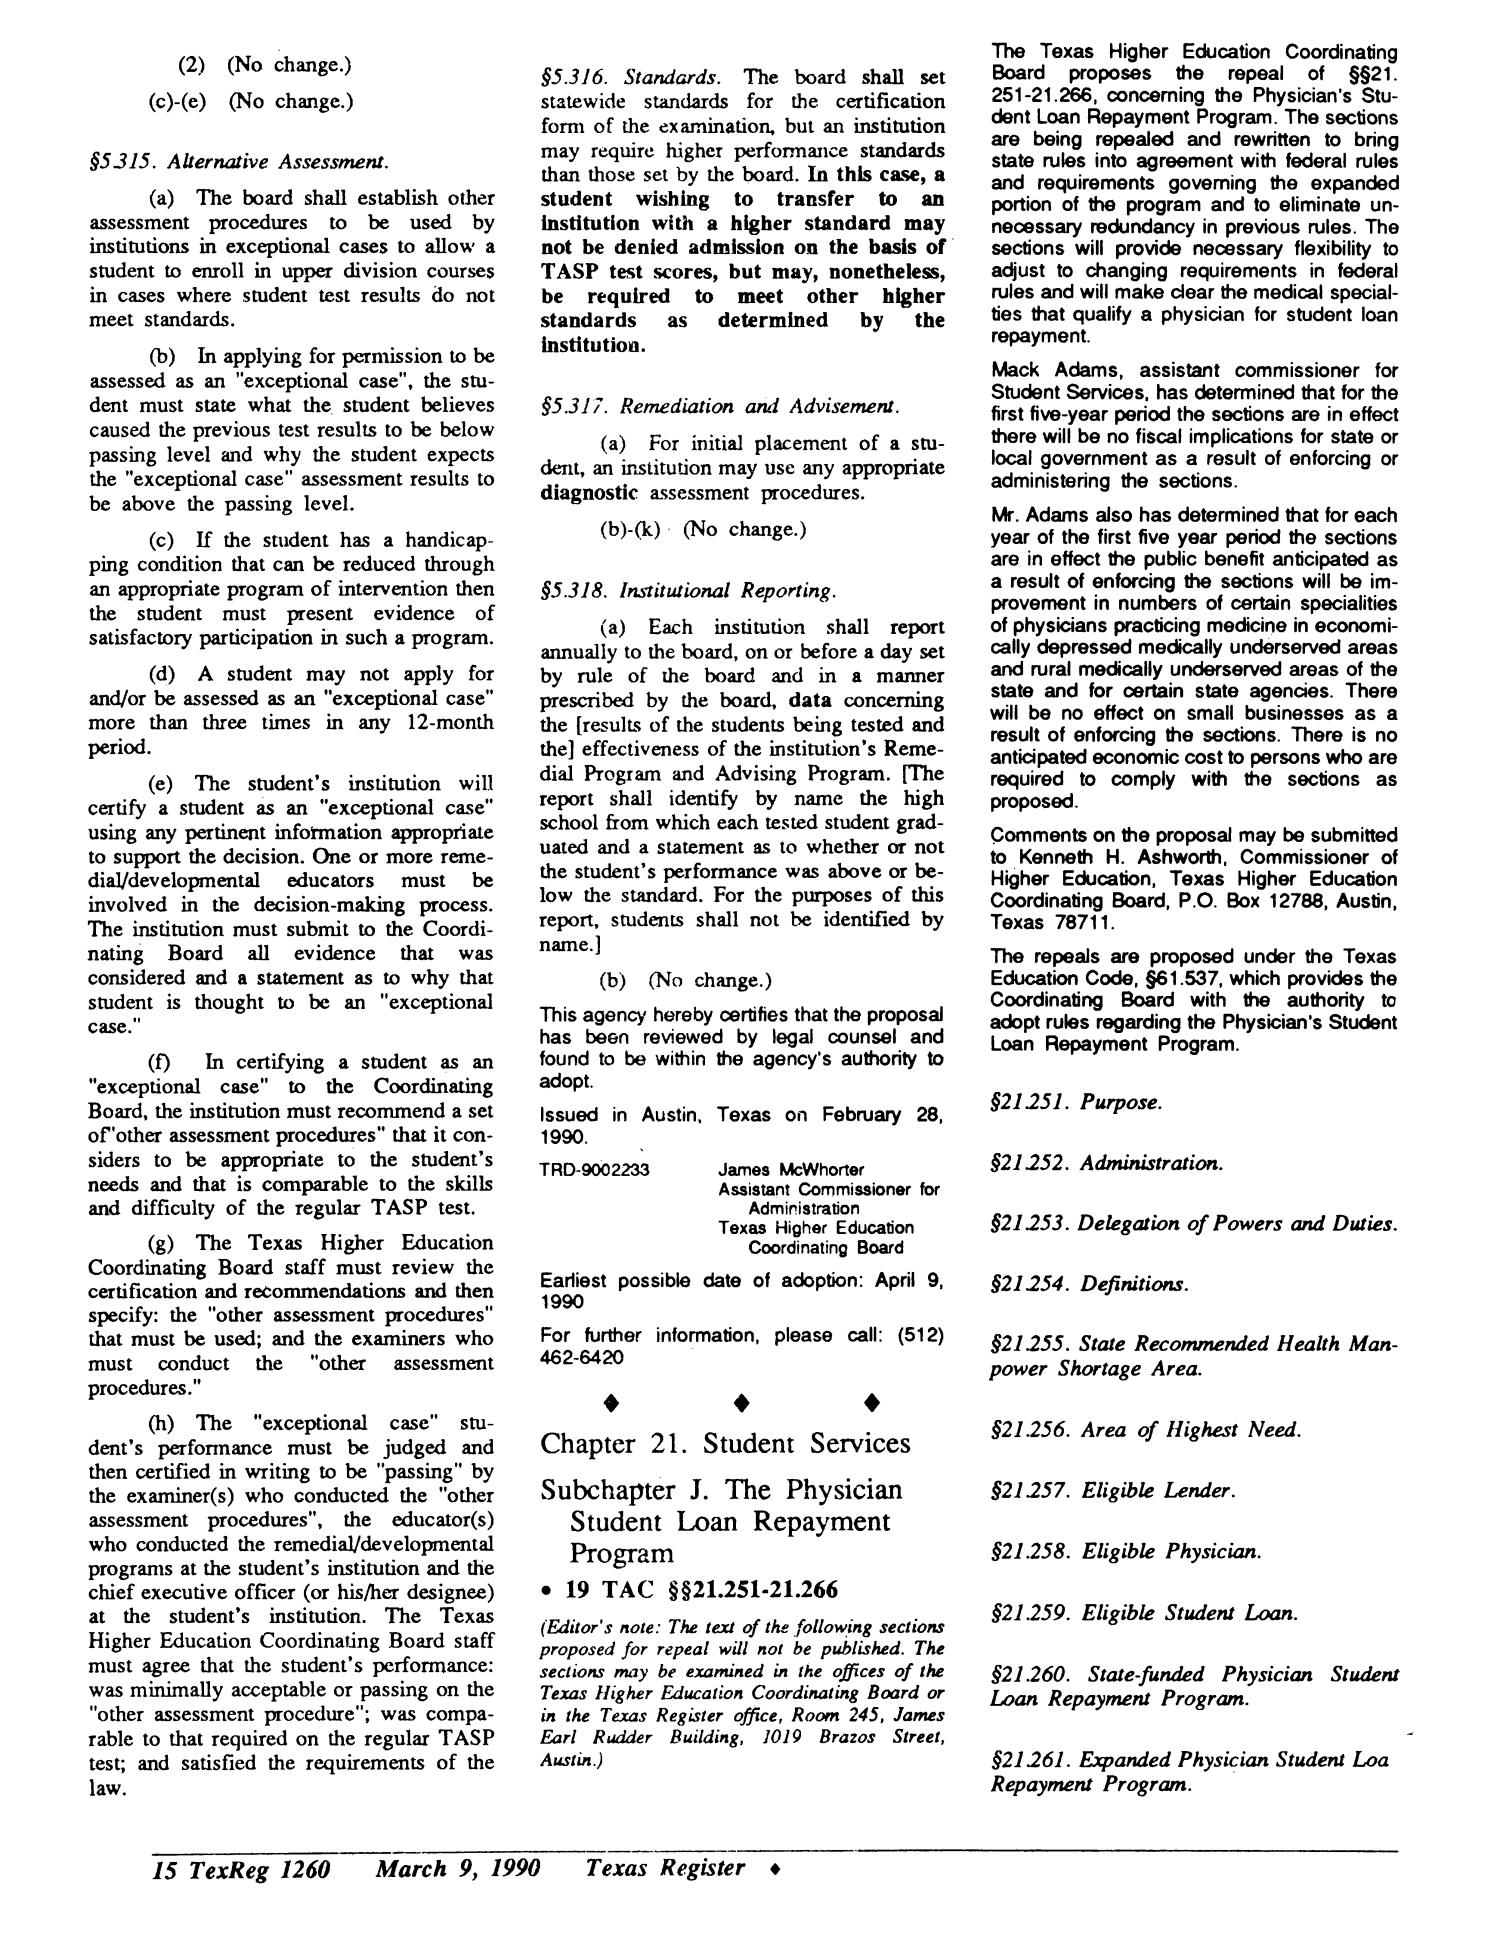 Texas Register, Volume 15, Number 19, Pages 1259-1326, March 9, 1990
                                                
                                                    1260
                                                